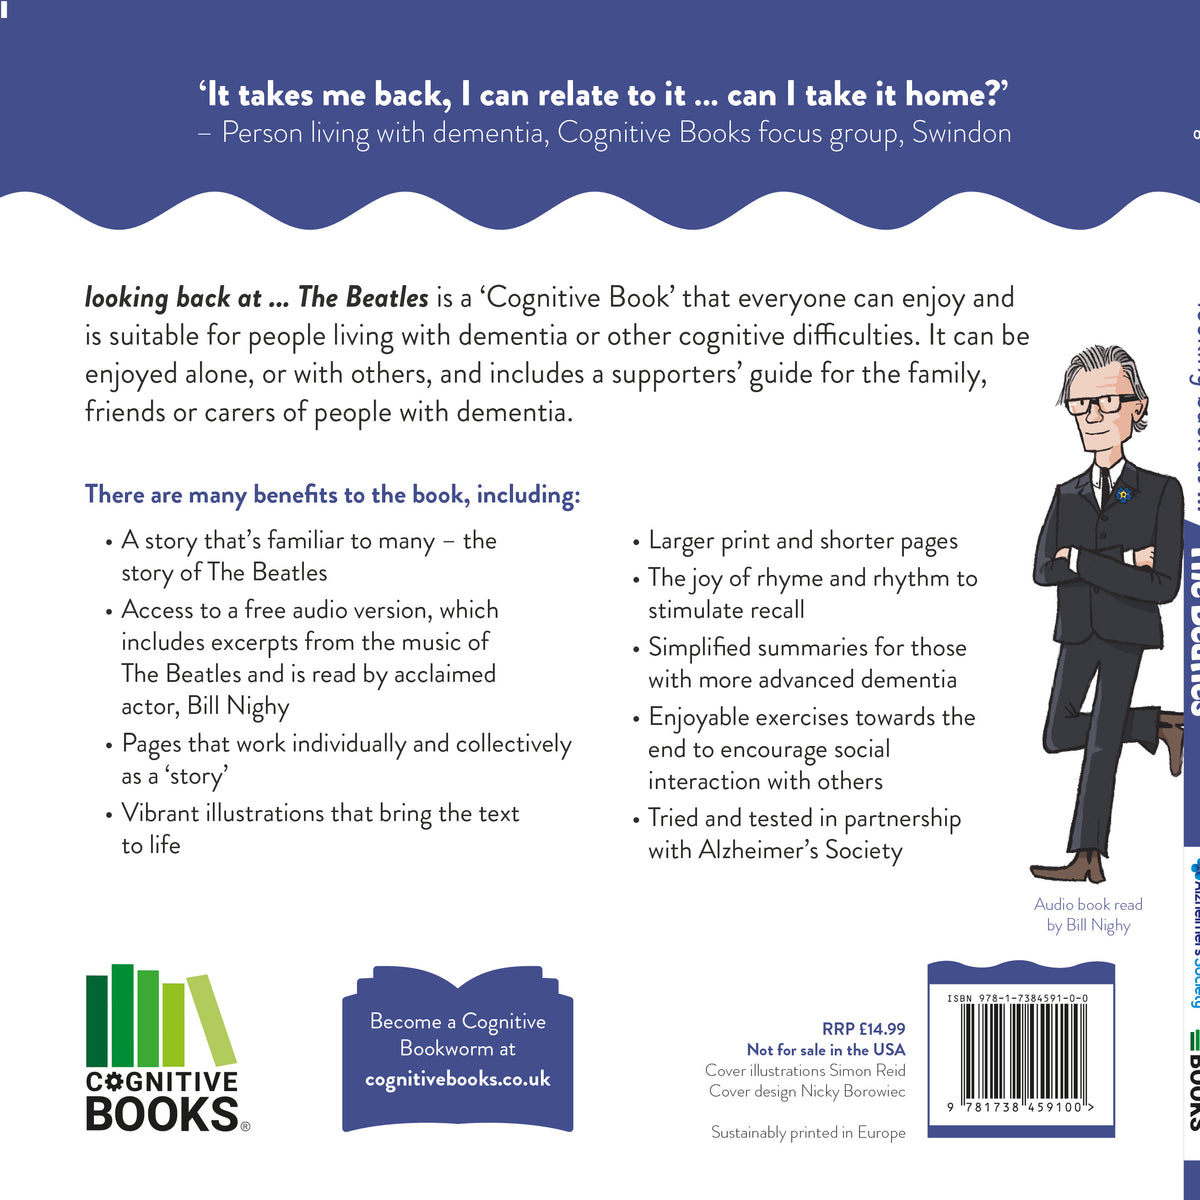 Back cover of book outlining the contents with an illustration of Bill Nighy.